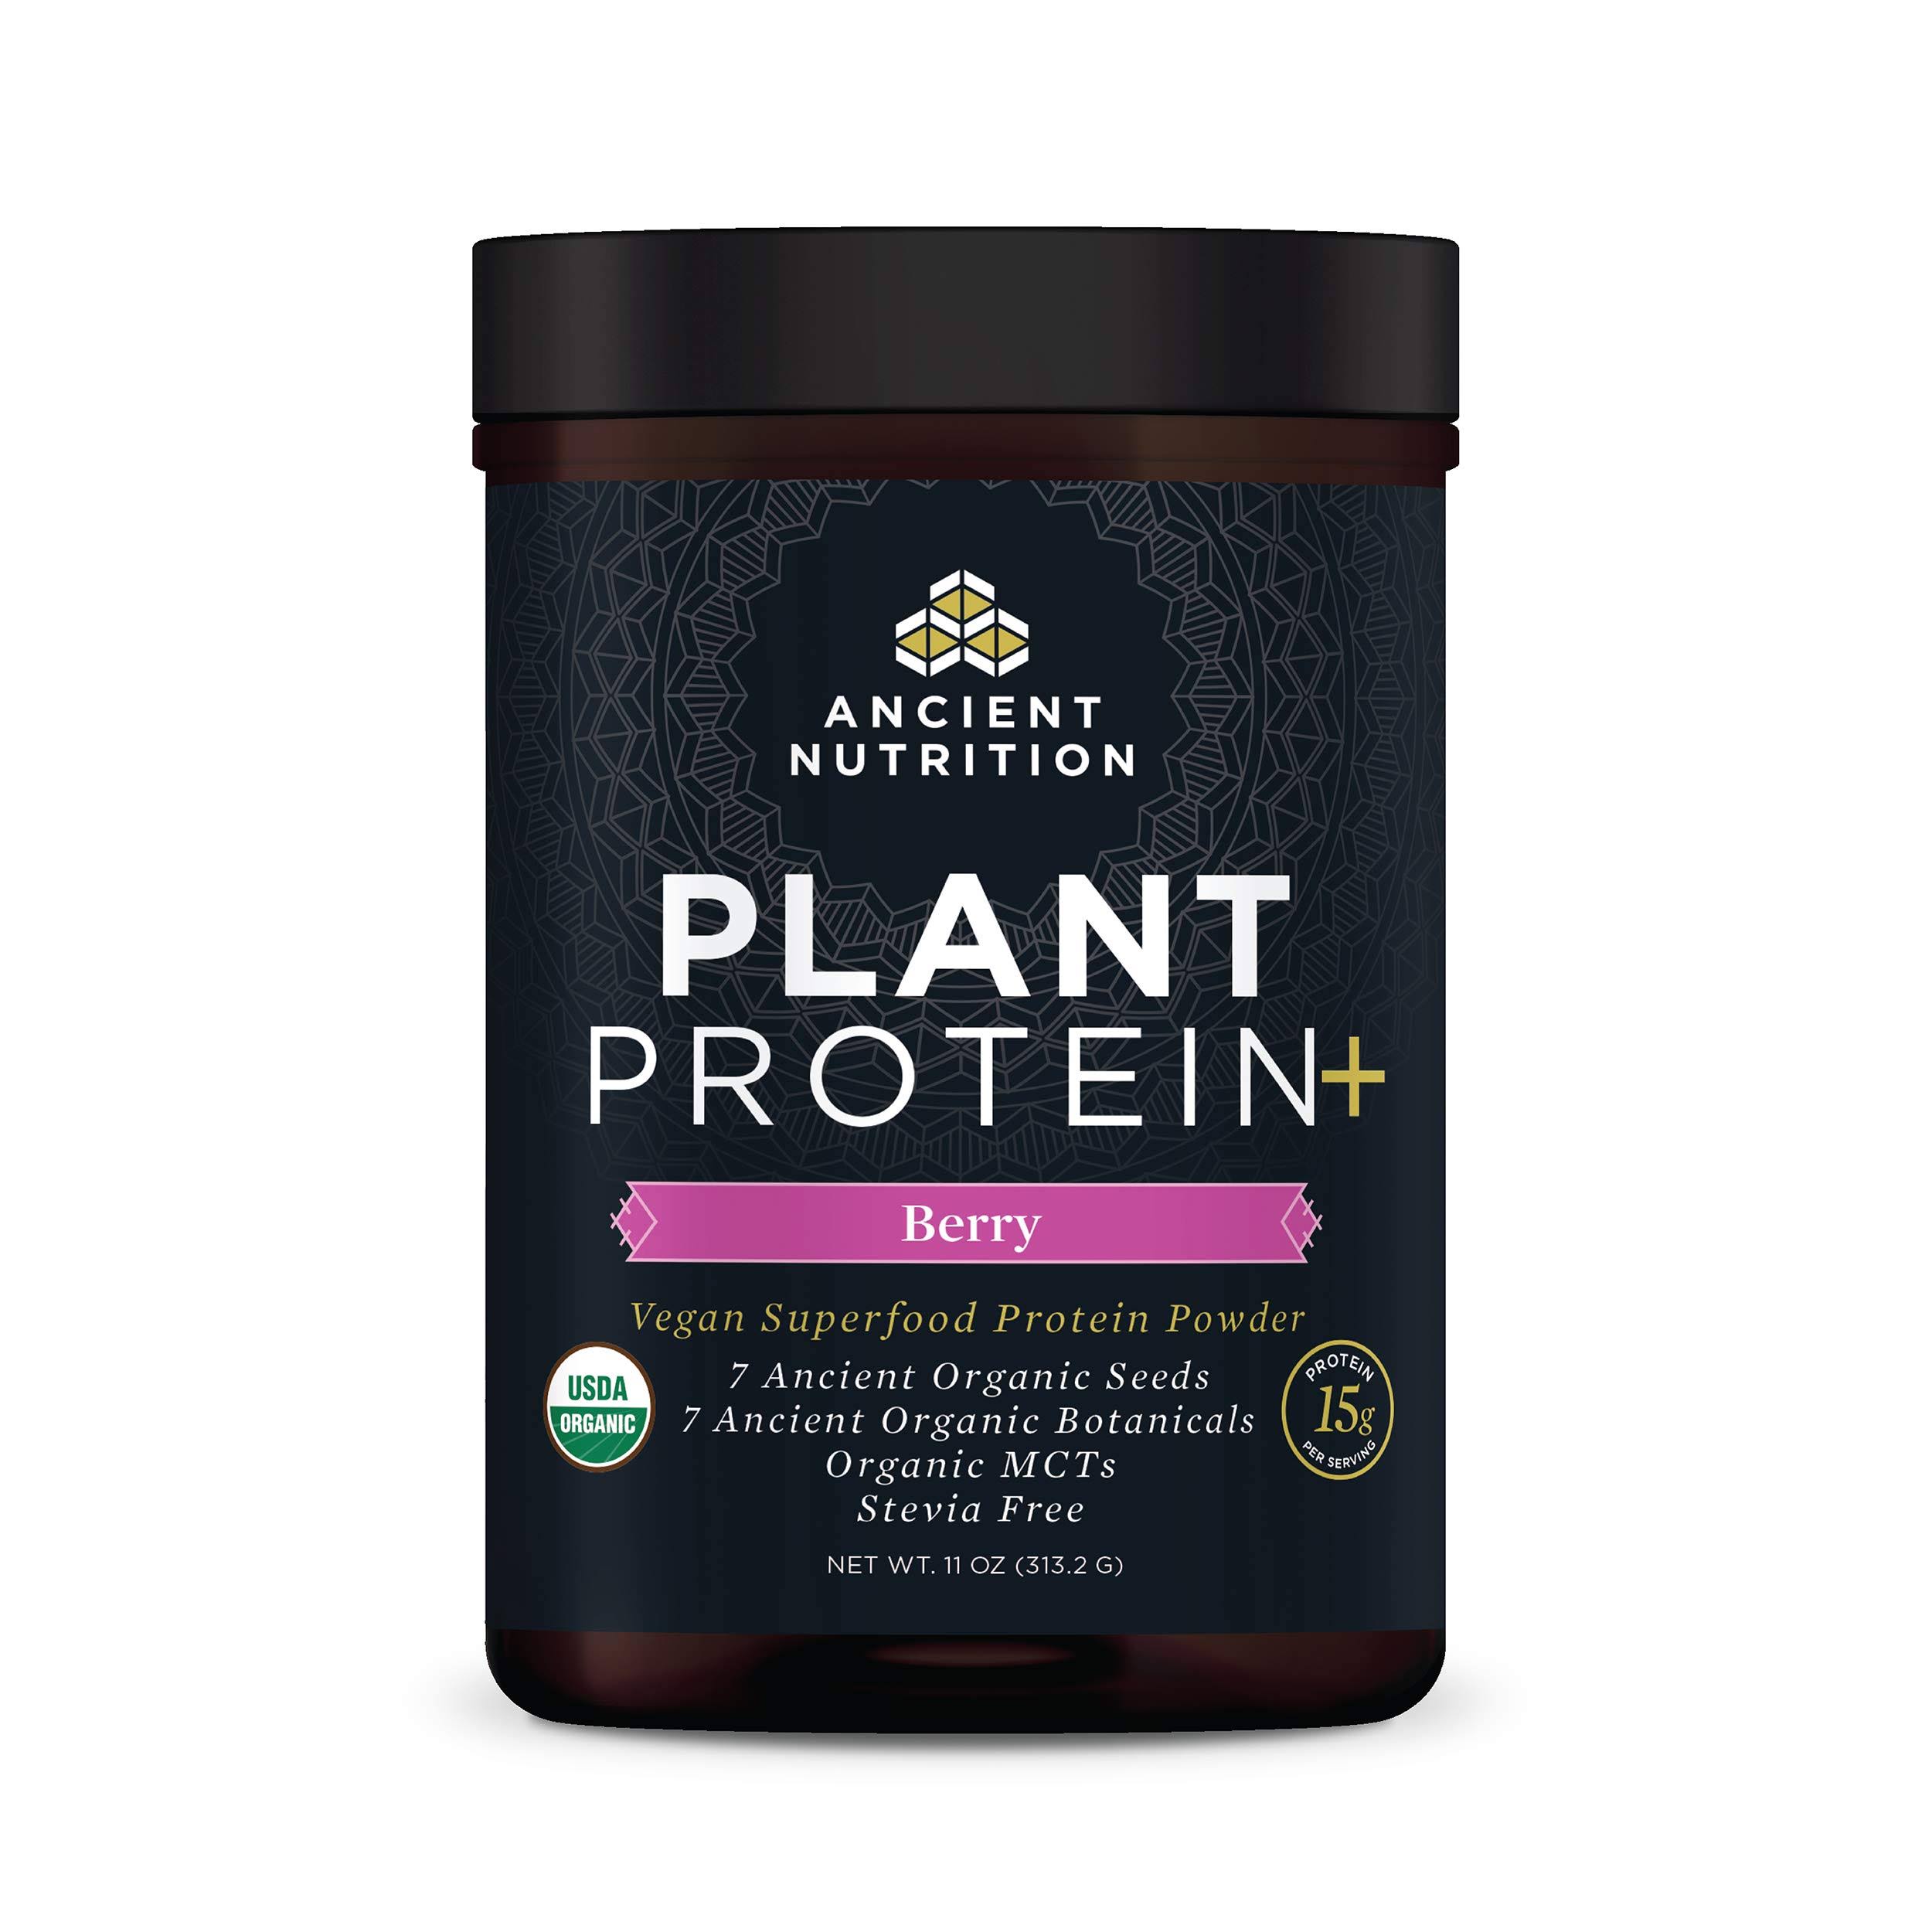 Ancient Nutrition Plant Protein+ Berry 313.2 Grams